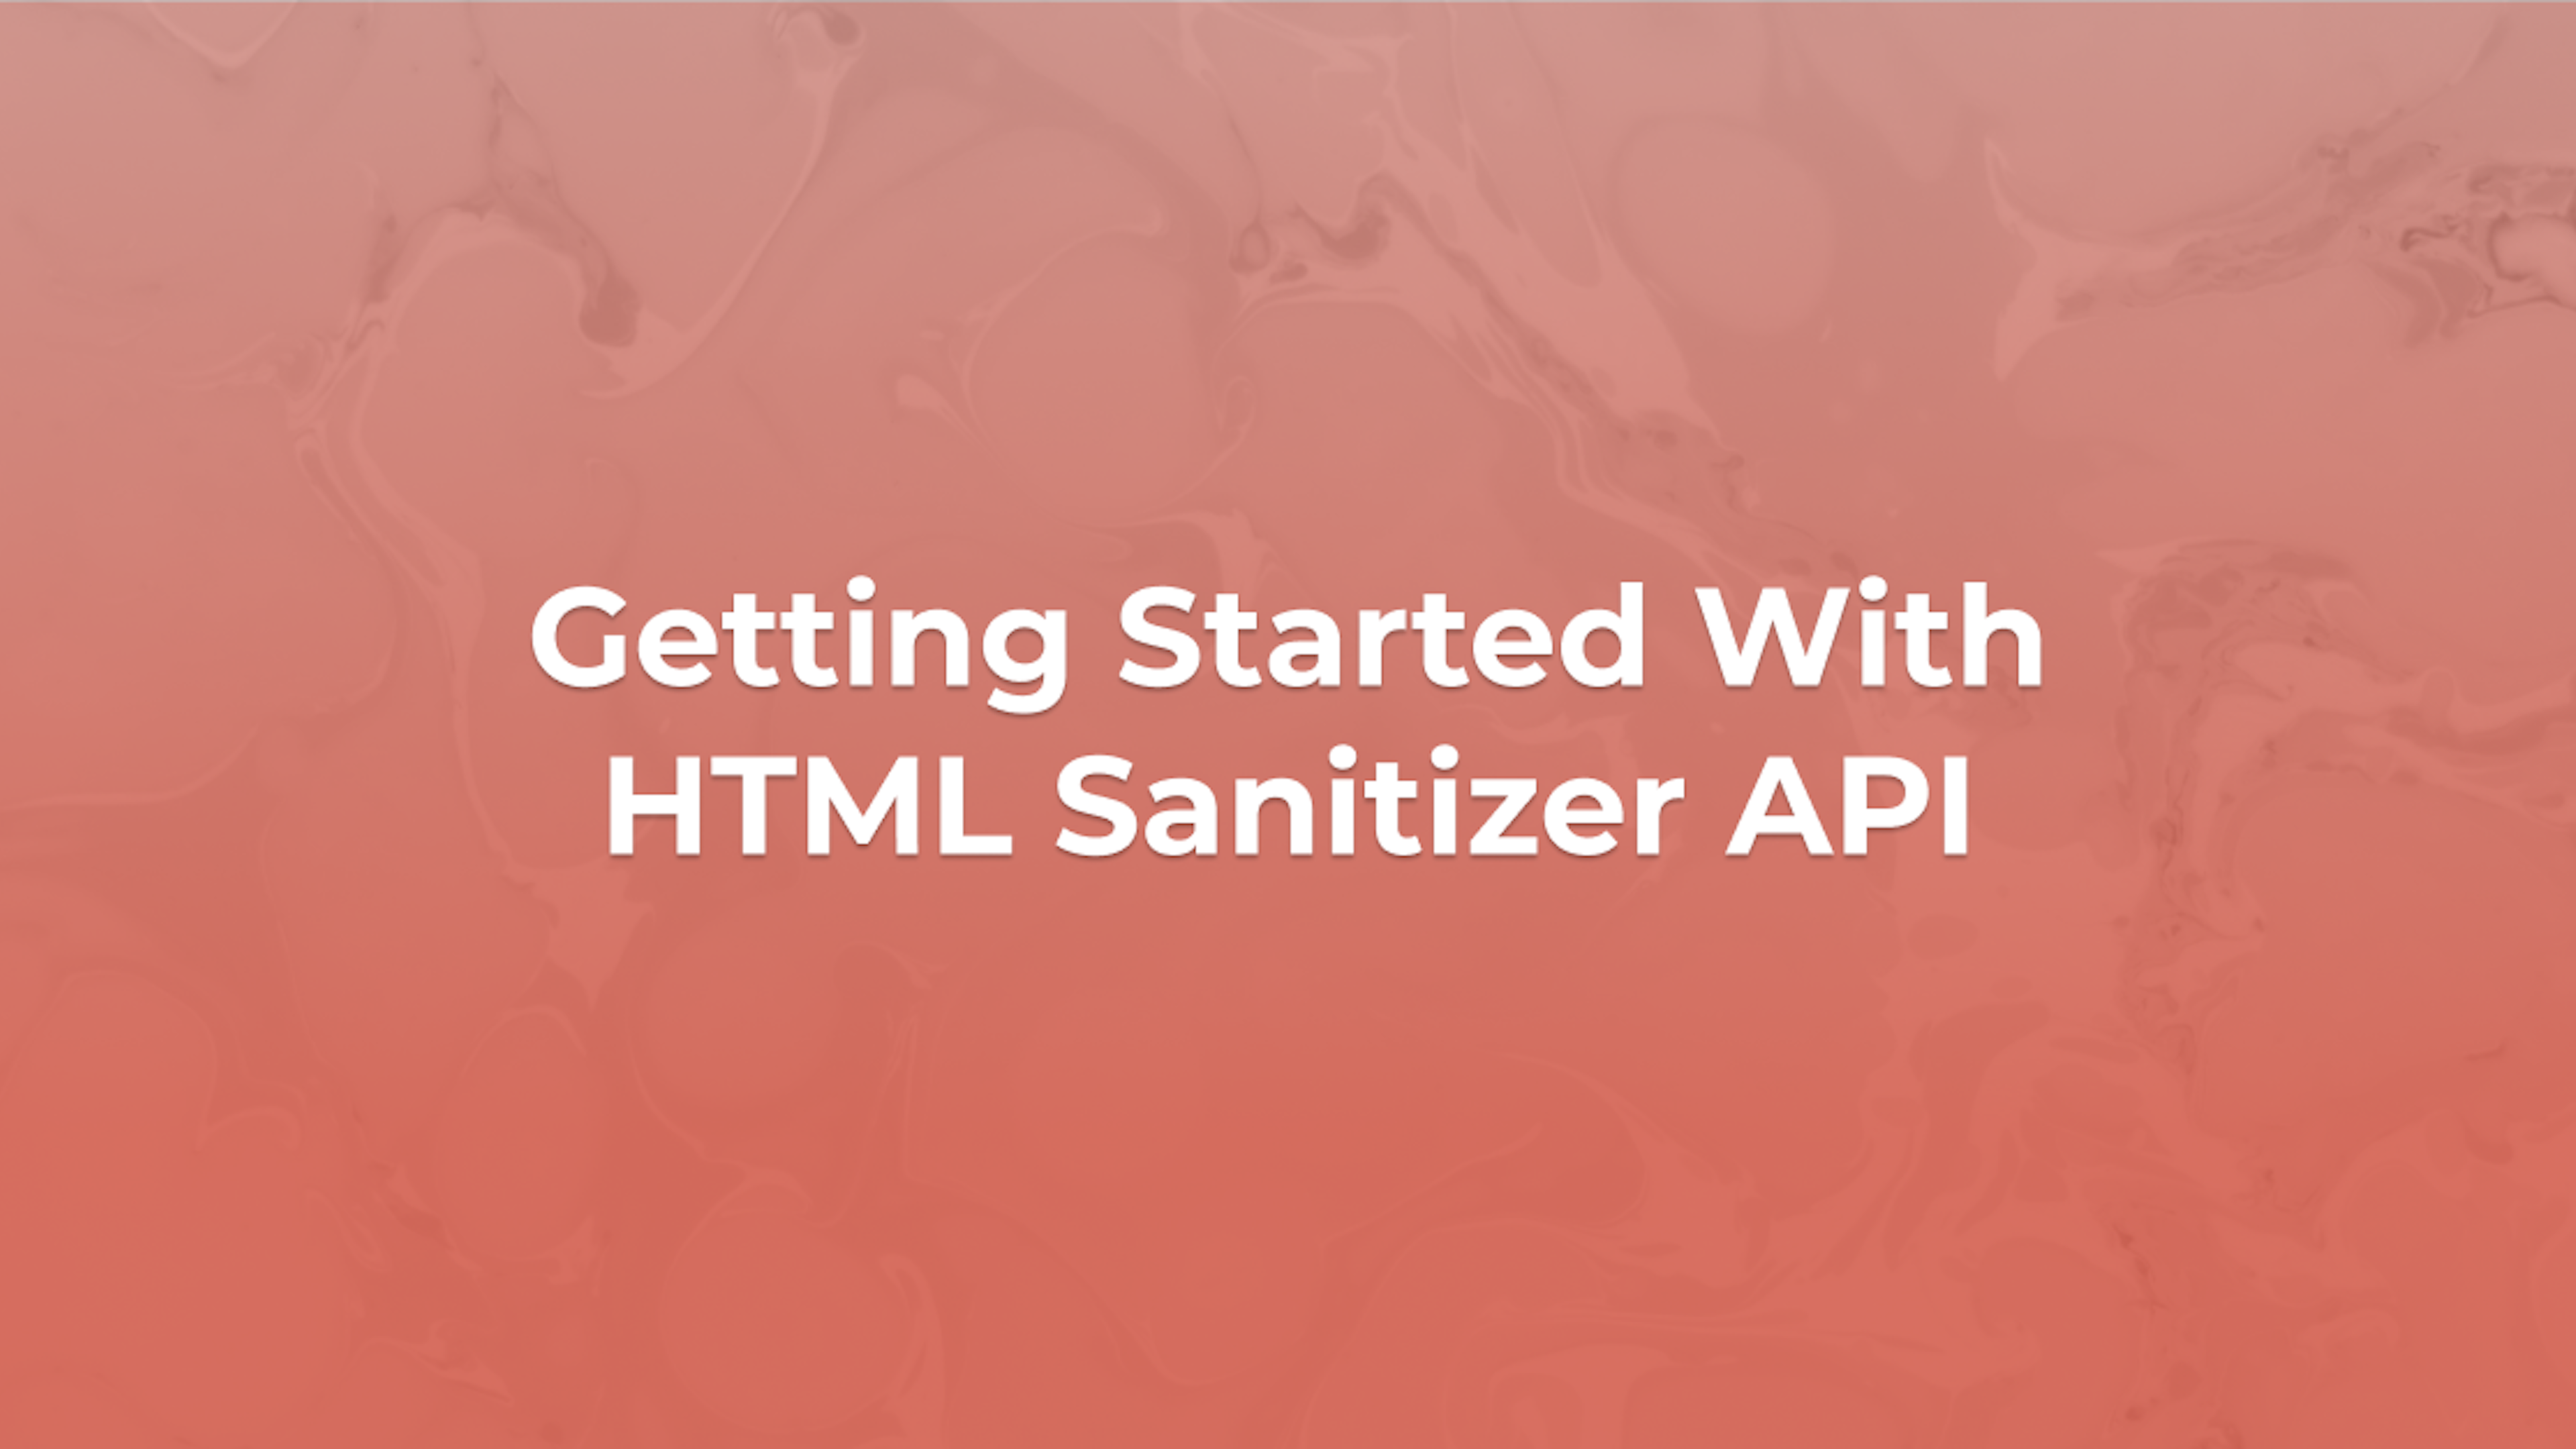 Getting Started With HTML Sanitizer API